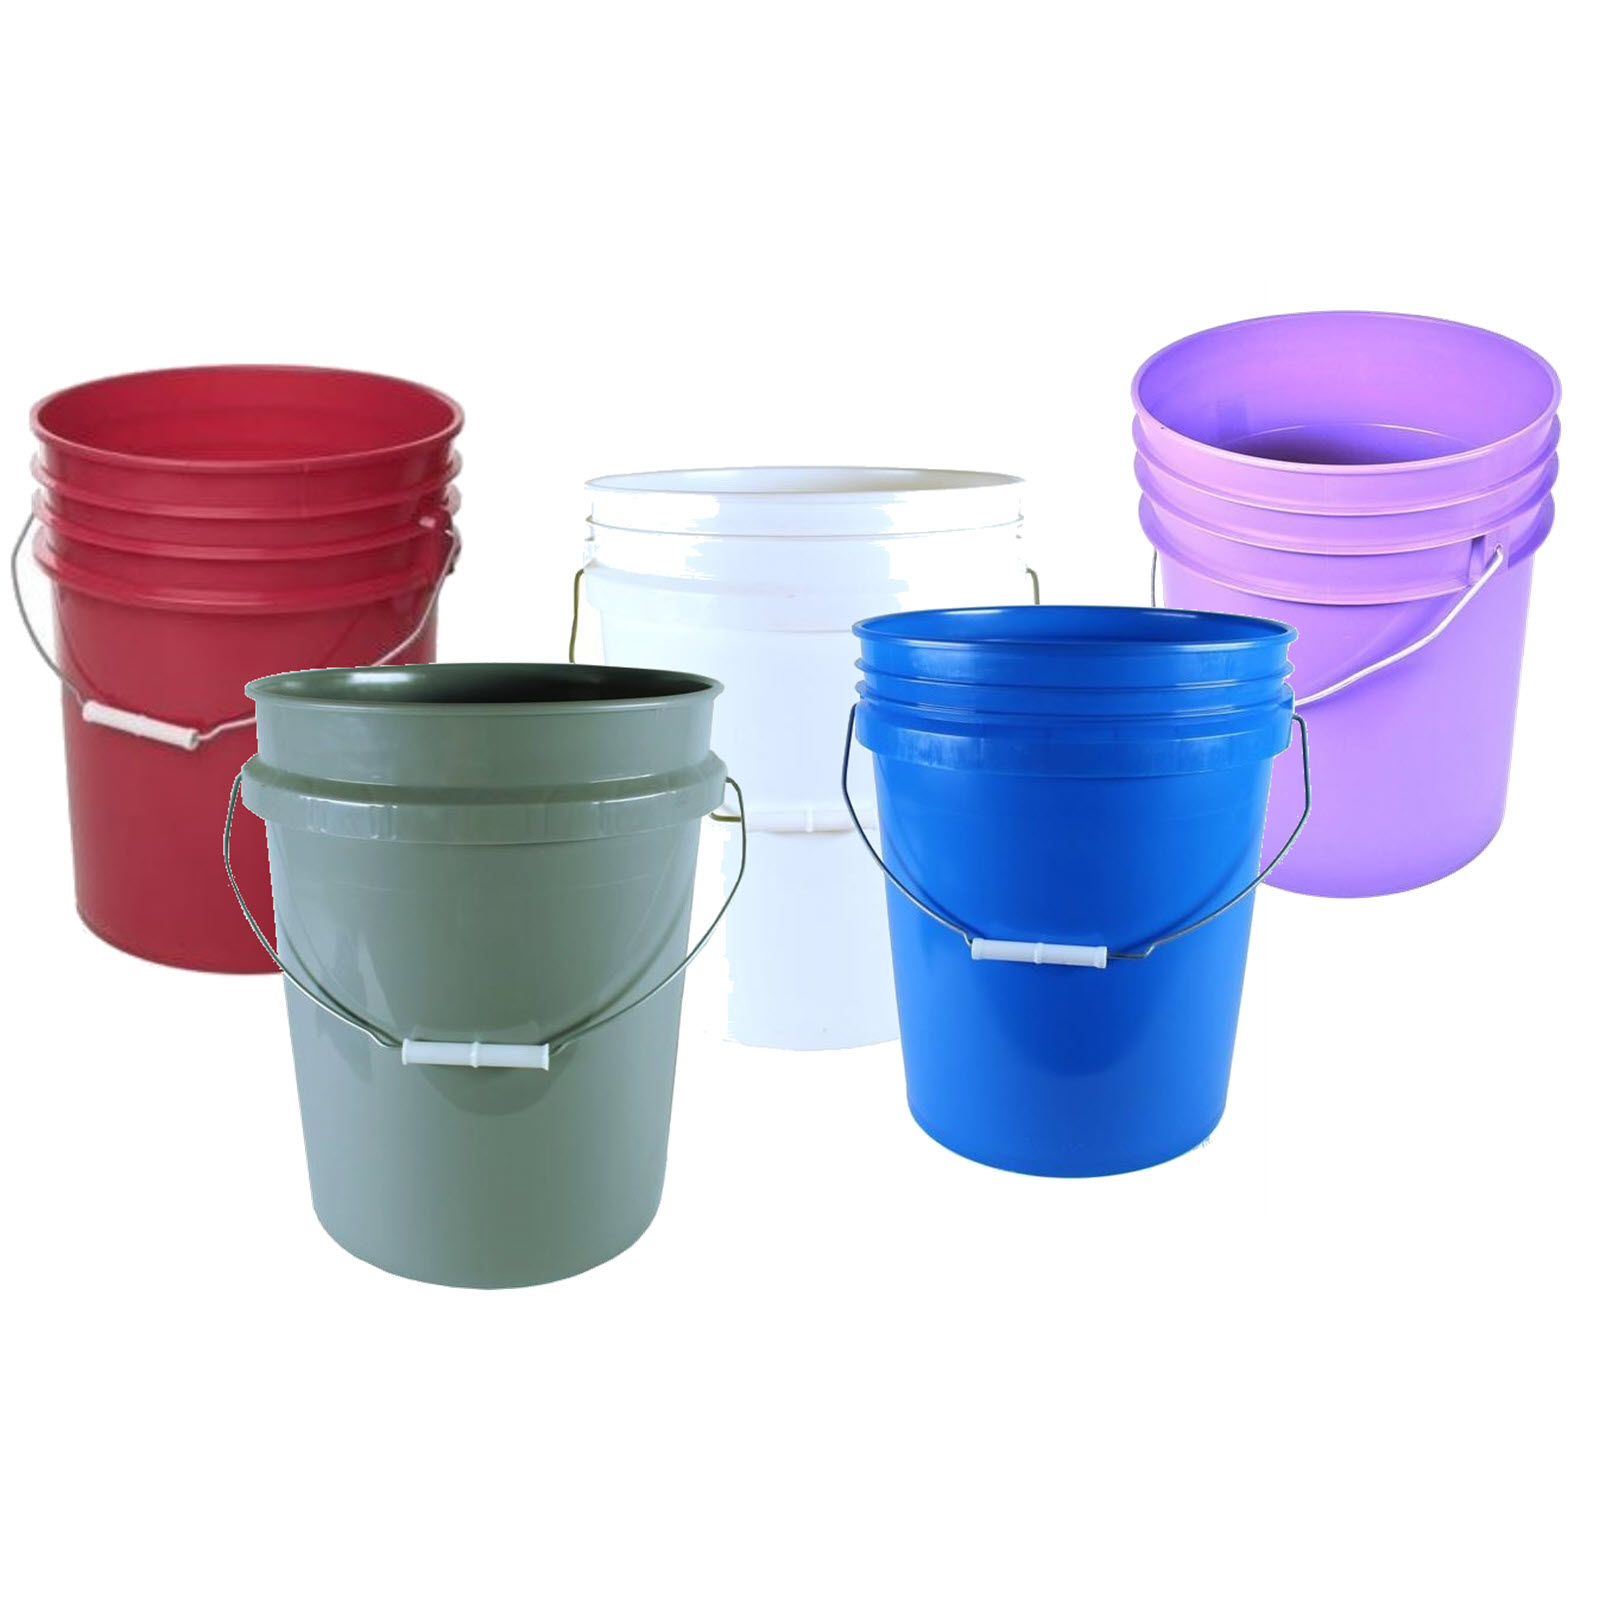 What are the bucket dimensions?